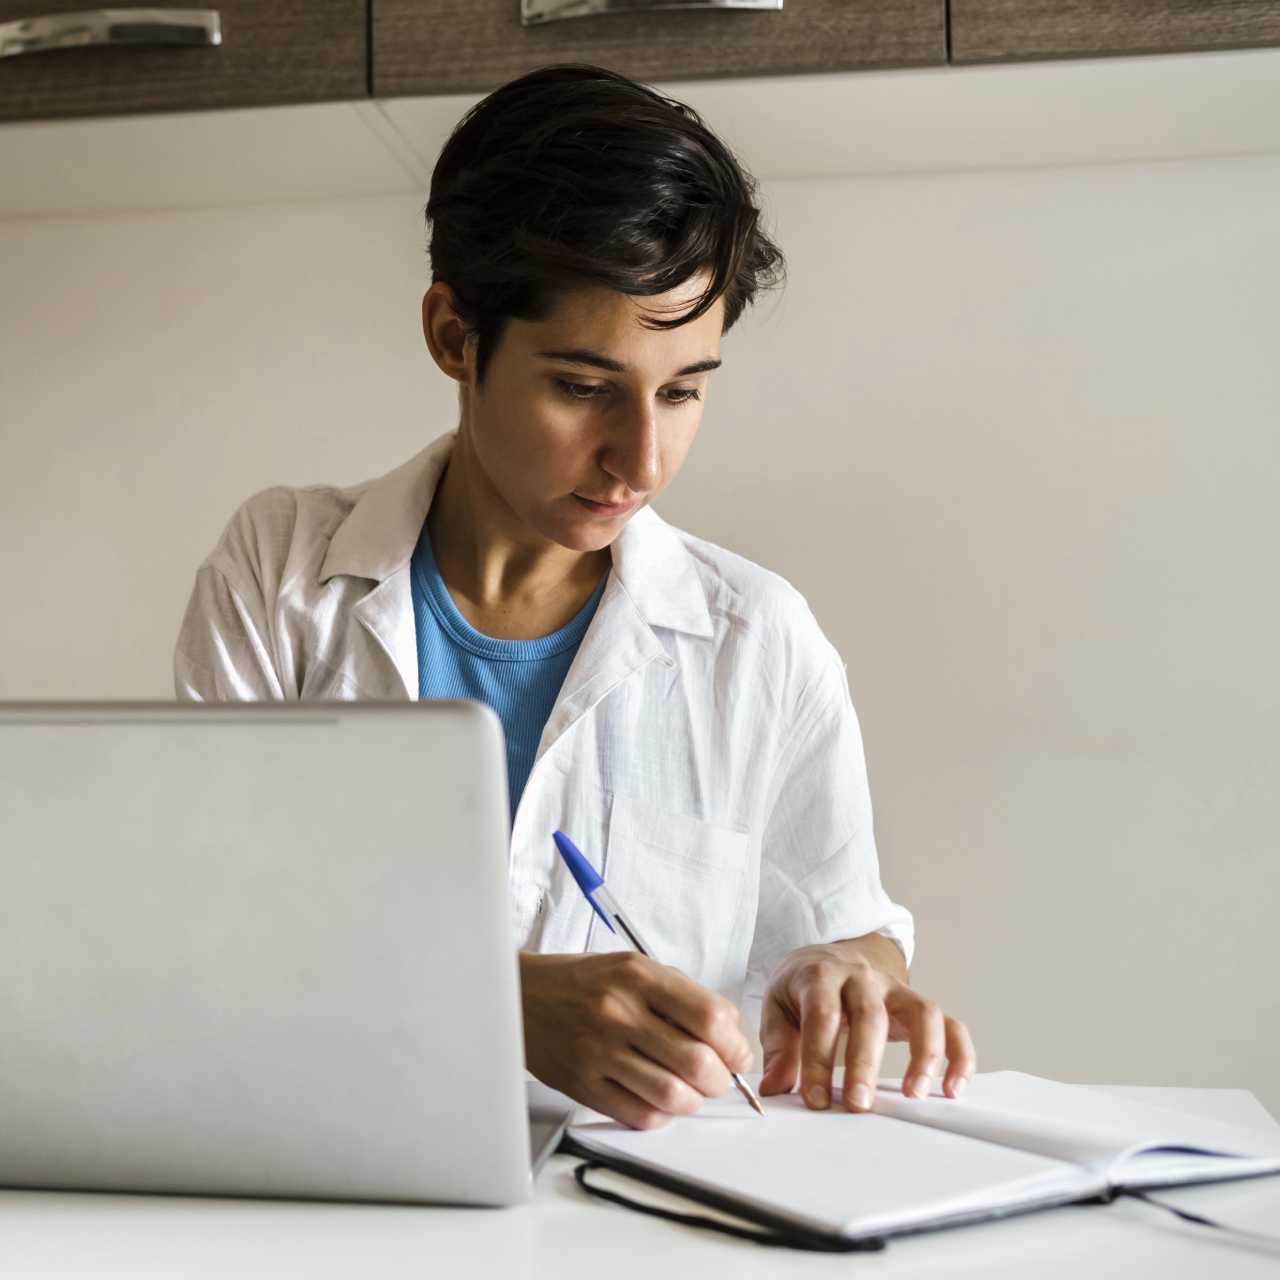 Healthcare worker in white coat sitting at desk with laptop and writing in notebook with pen